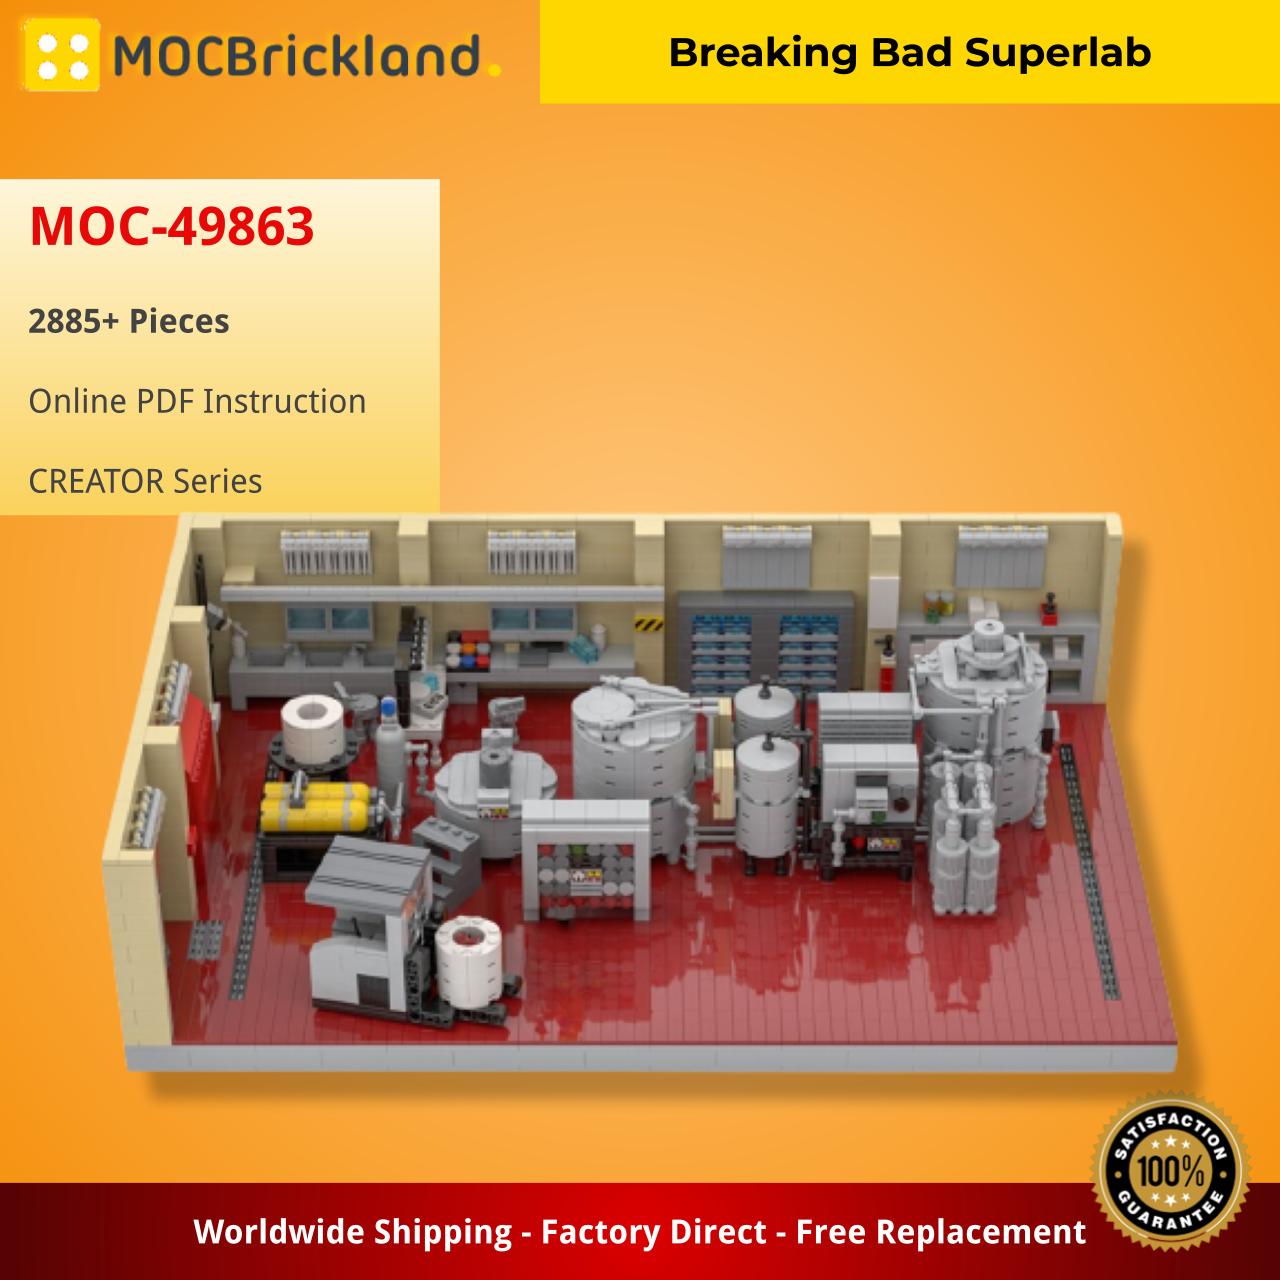 Breaking Bad Superlab CREATOR MOC-49863 by YCBricks WITH 2885 PIECES